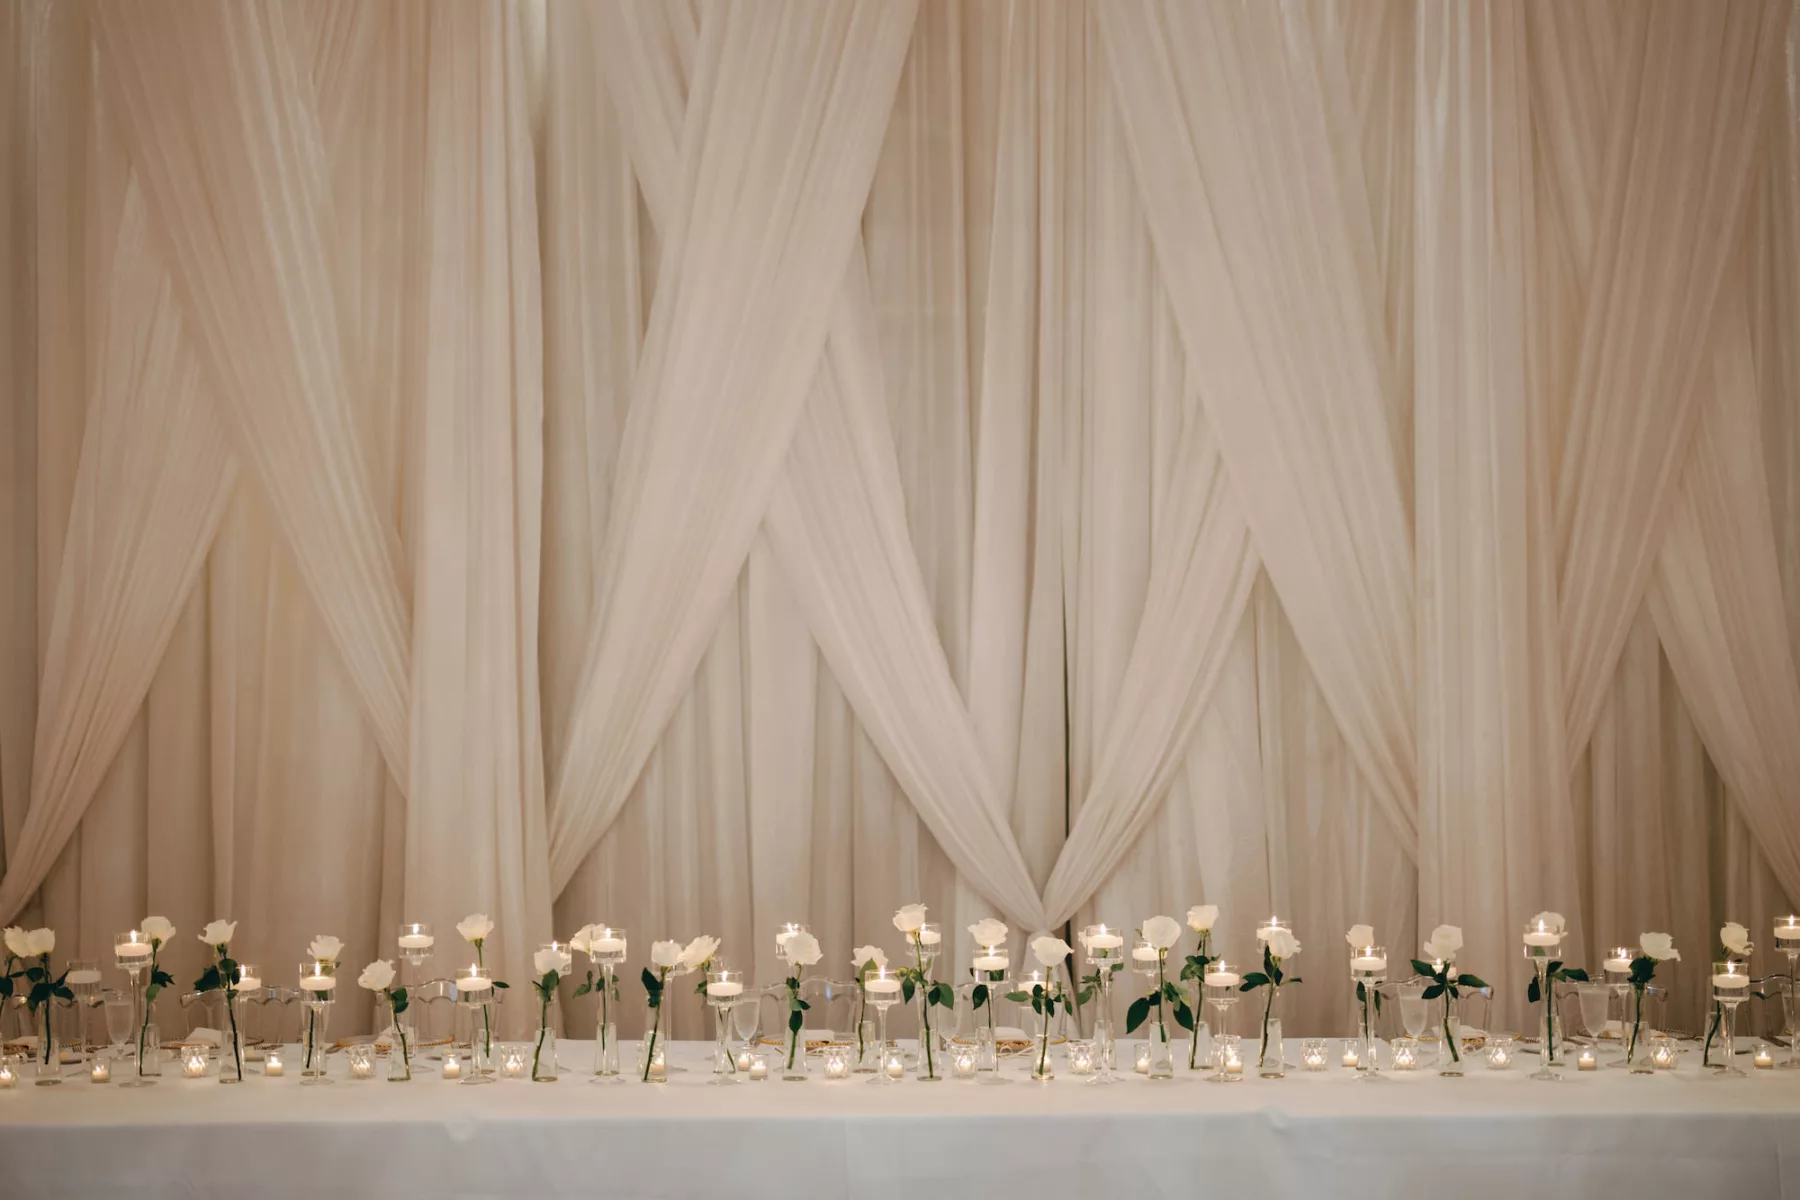 Timeless Monochromatic Wedding Reception Decor Ideas | White Drapery, Floating Candles, Tea Lights, and Individual White Roses in Tall Bud Vases